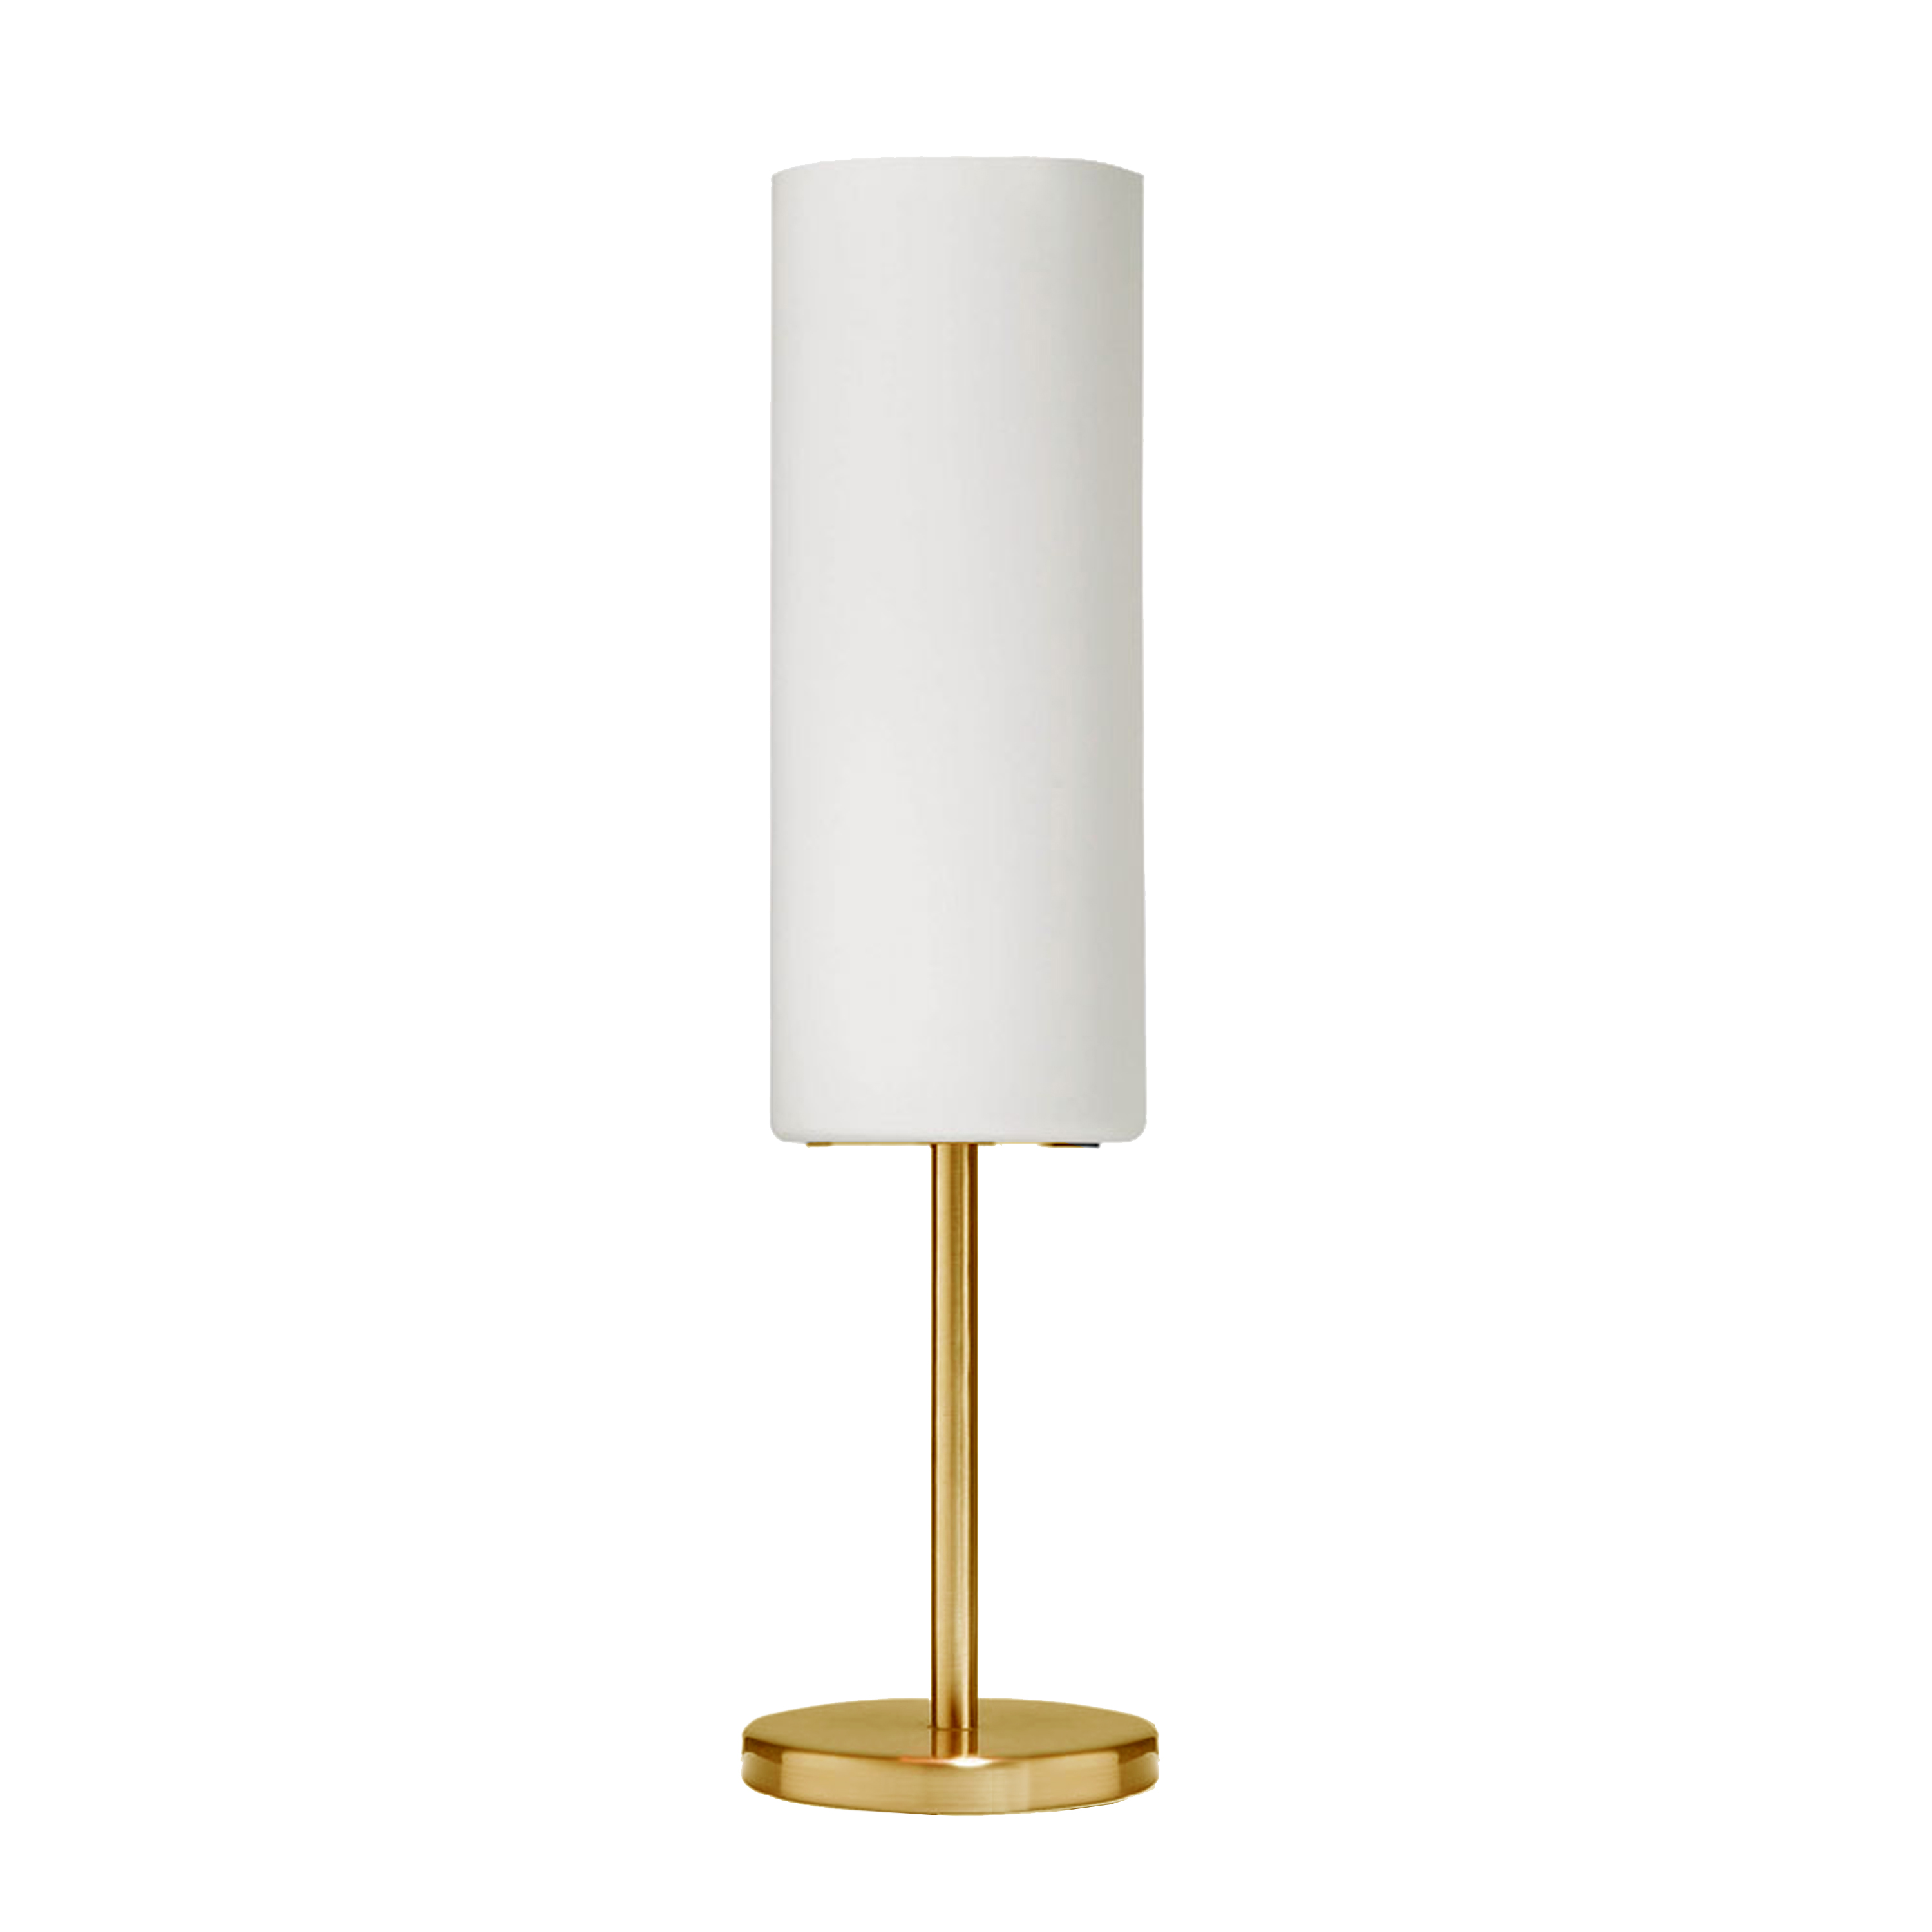 1 Light Incandescent Table Lamp, Aged Brass with White Glass